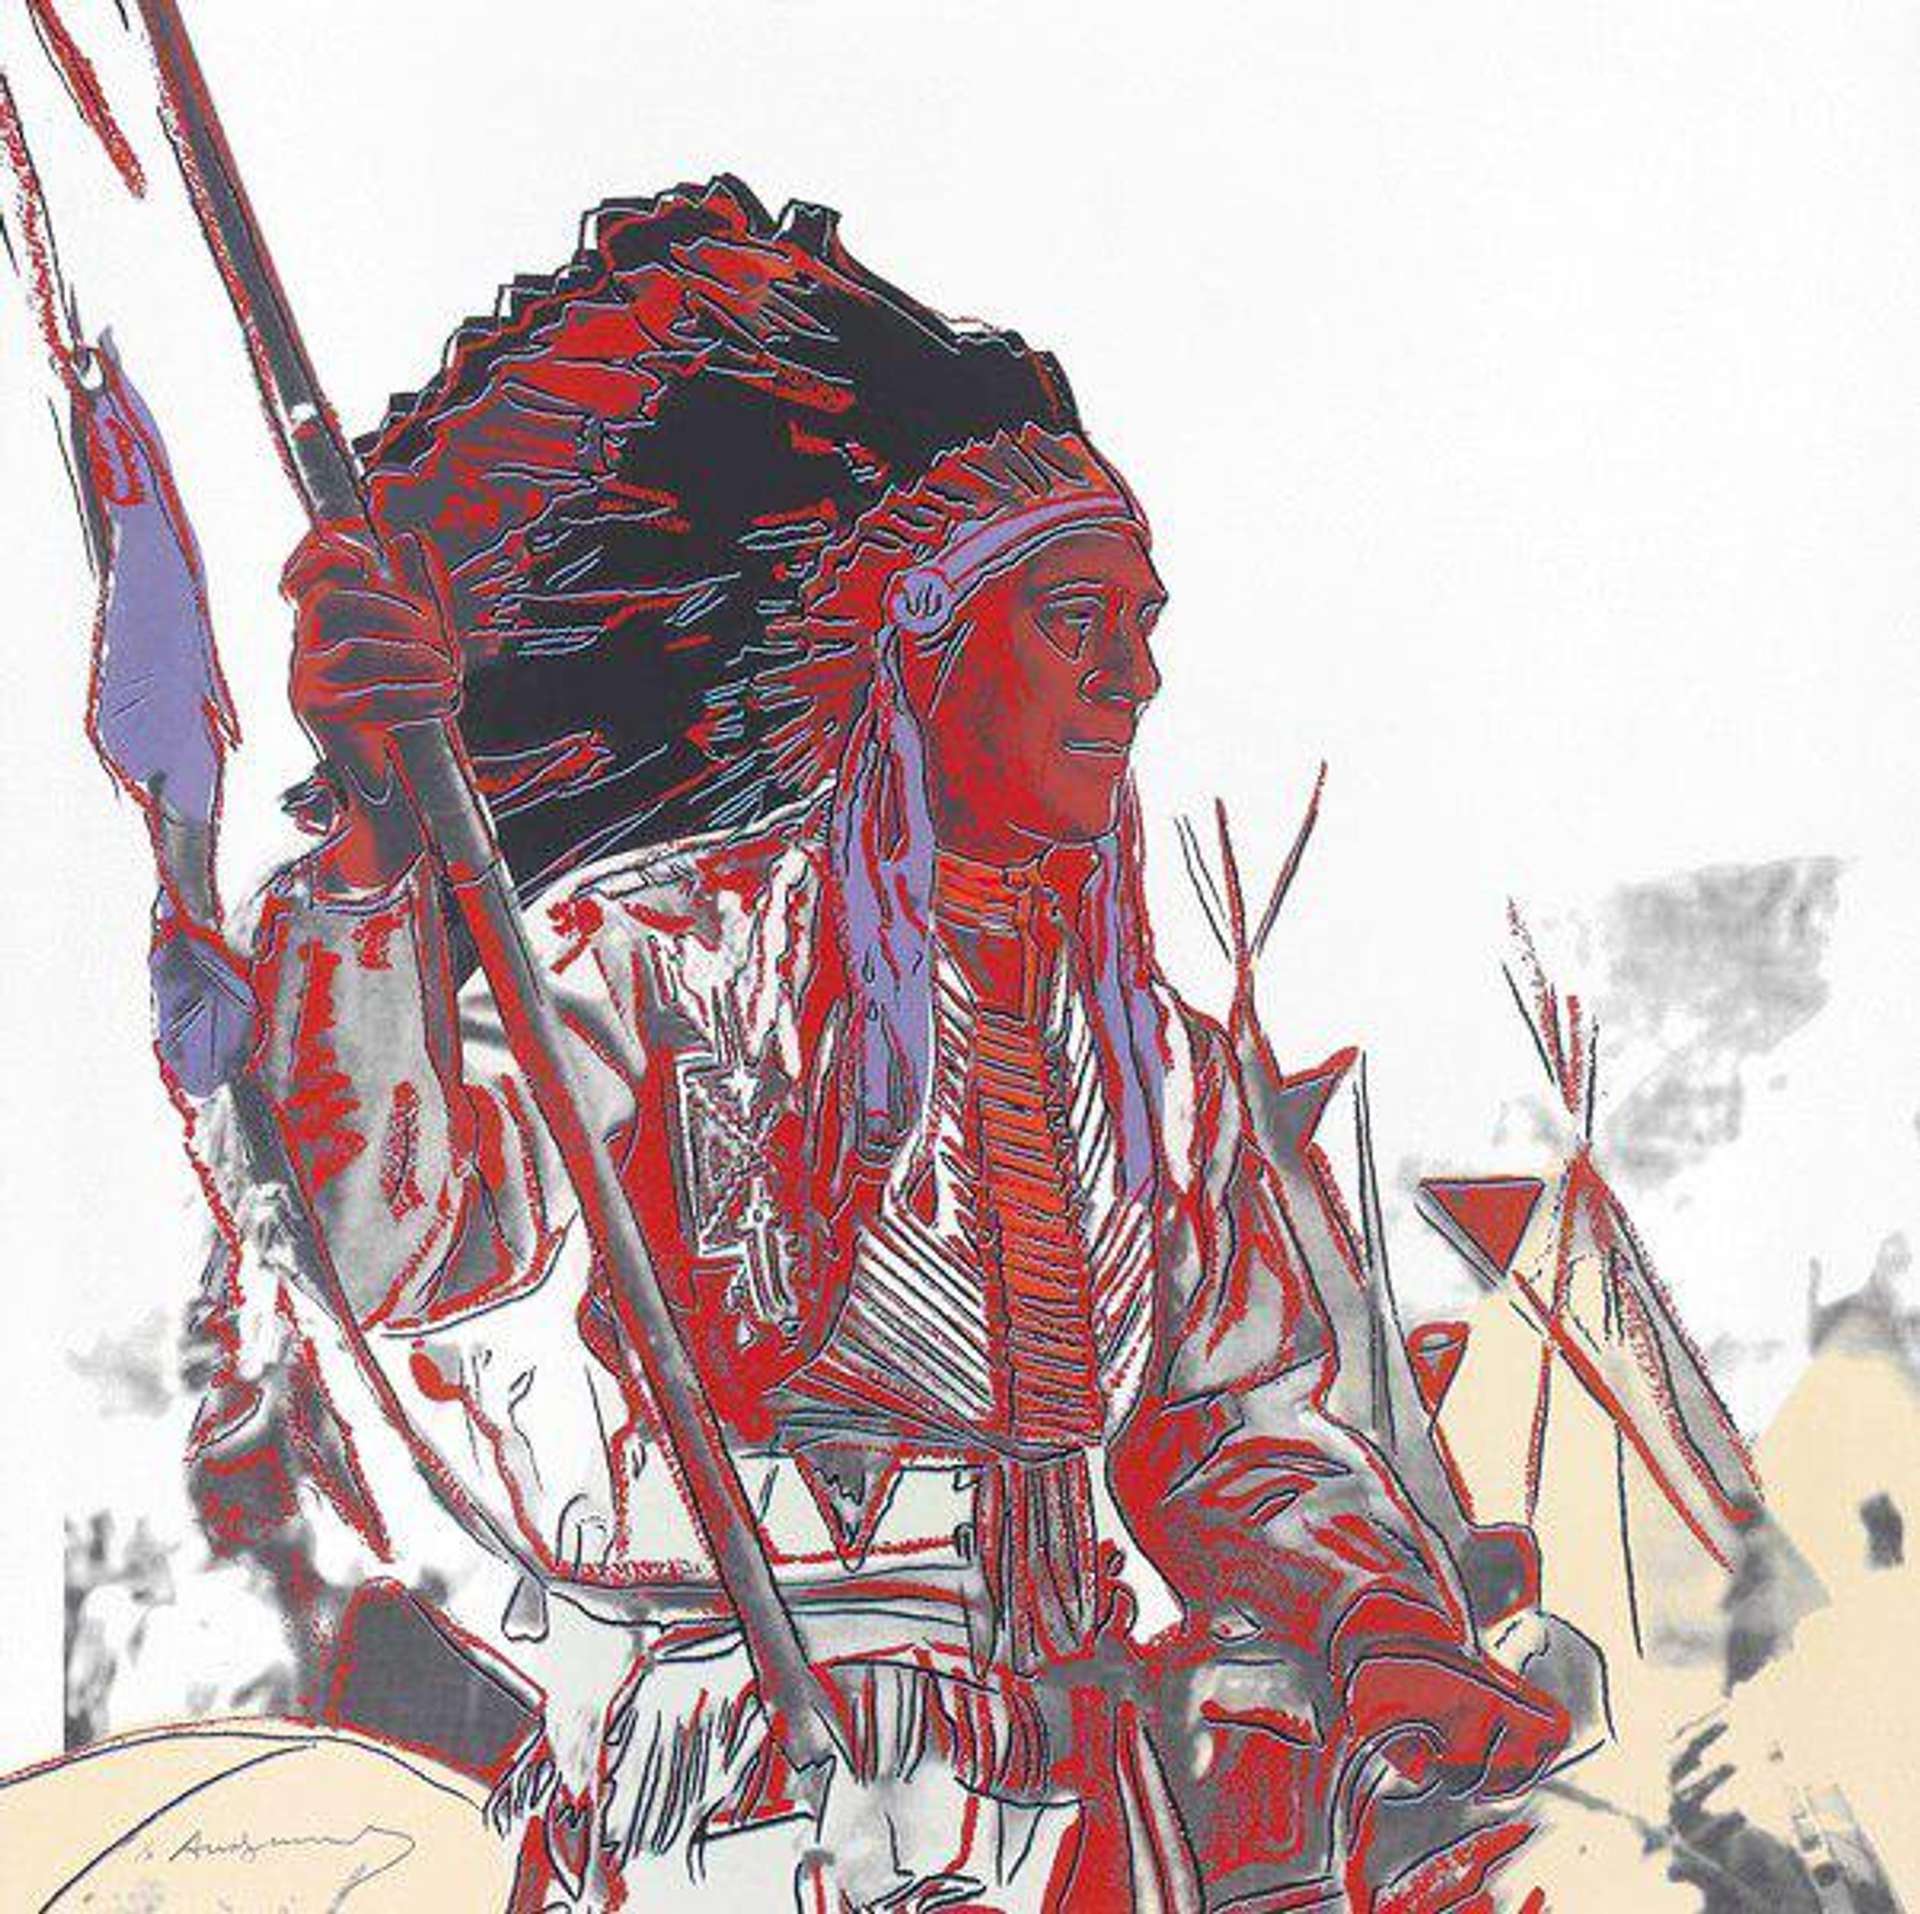 A screenprint by Andy Warhol depicting a Native American wearing a war bonnet in bright red, set against a white background.